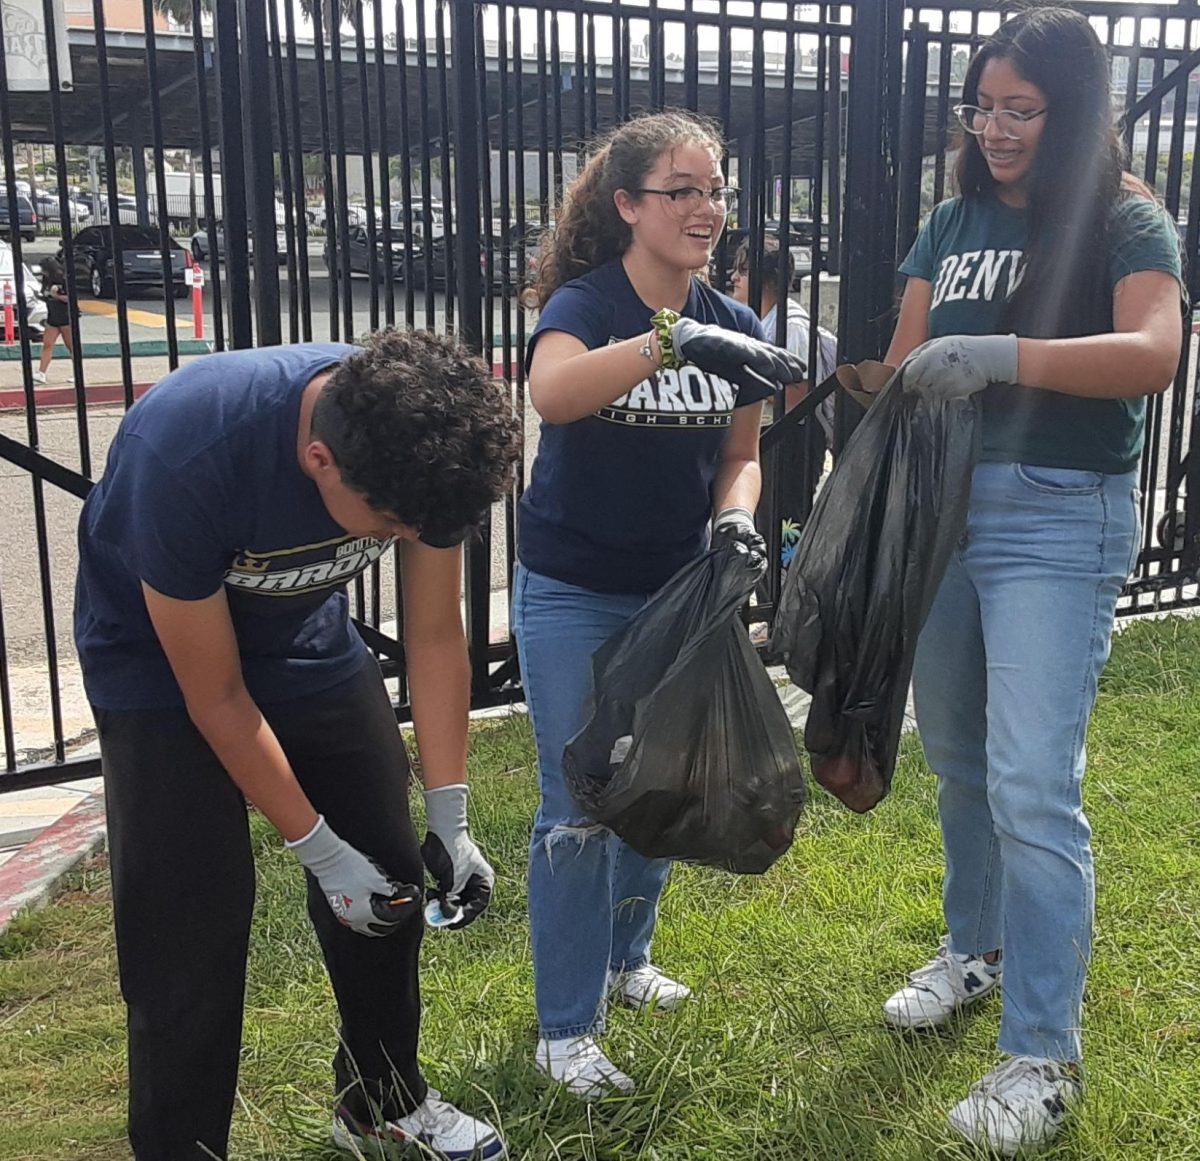 On Oct. 14 BVH students work alongside staff to Beautify Bonita and complete tasks that range from raking leaves to trimming trees in hopes of providing a clean campus.